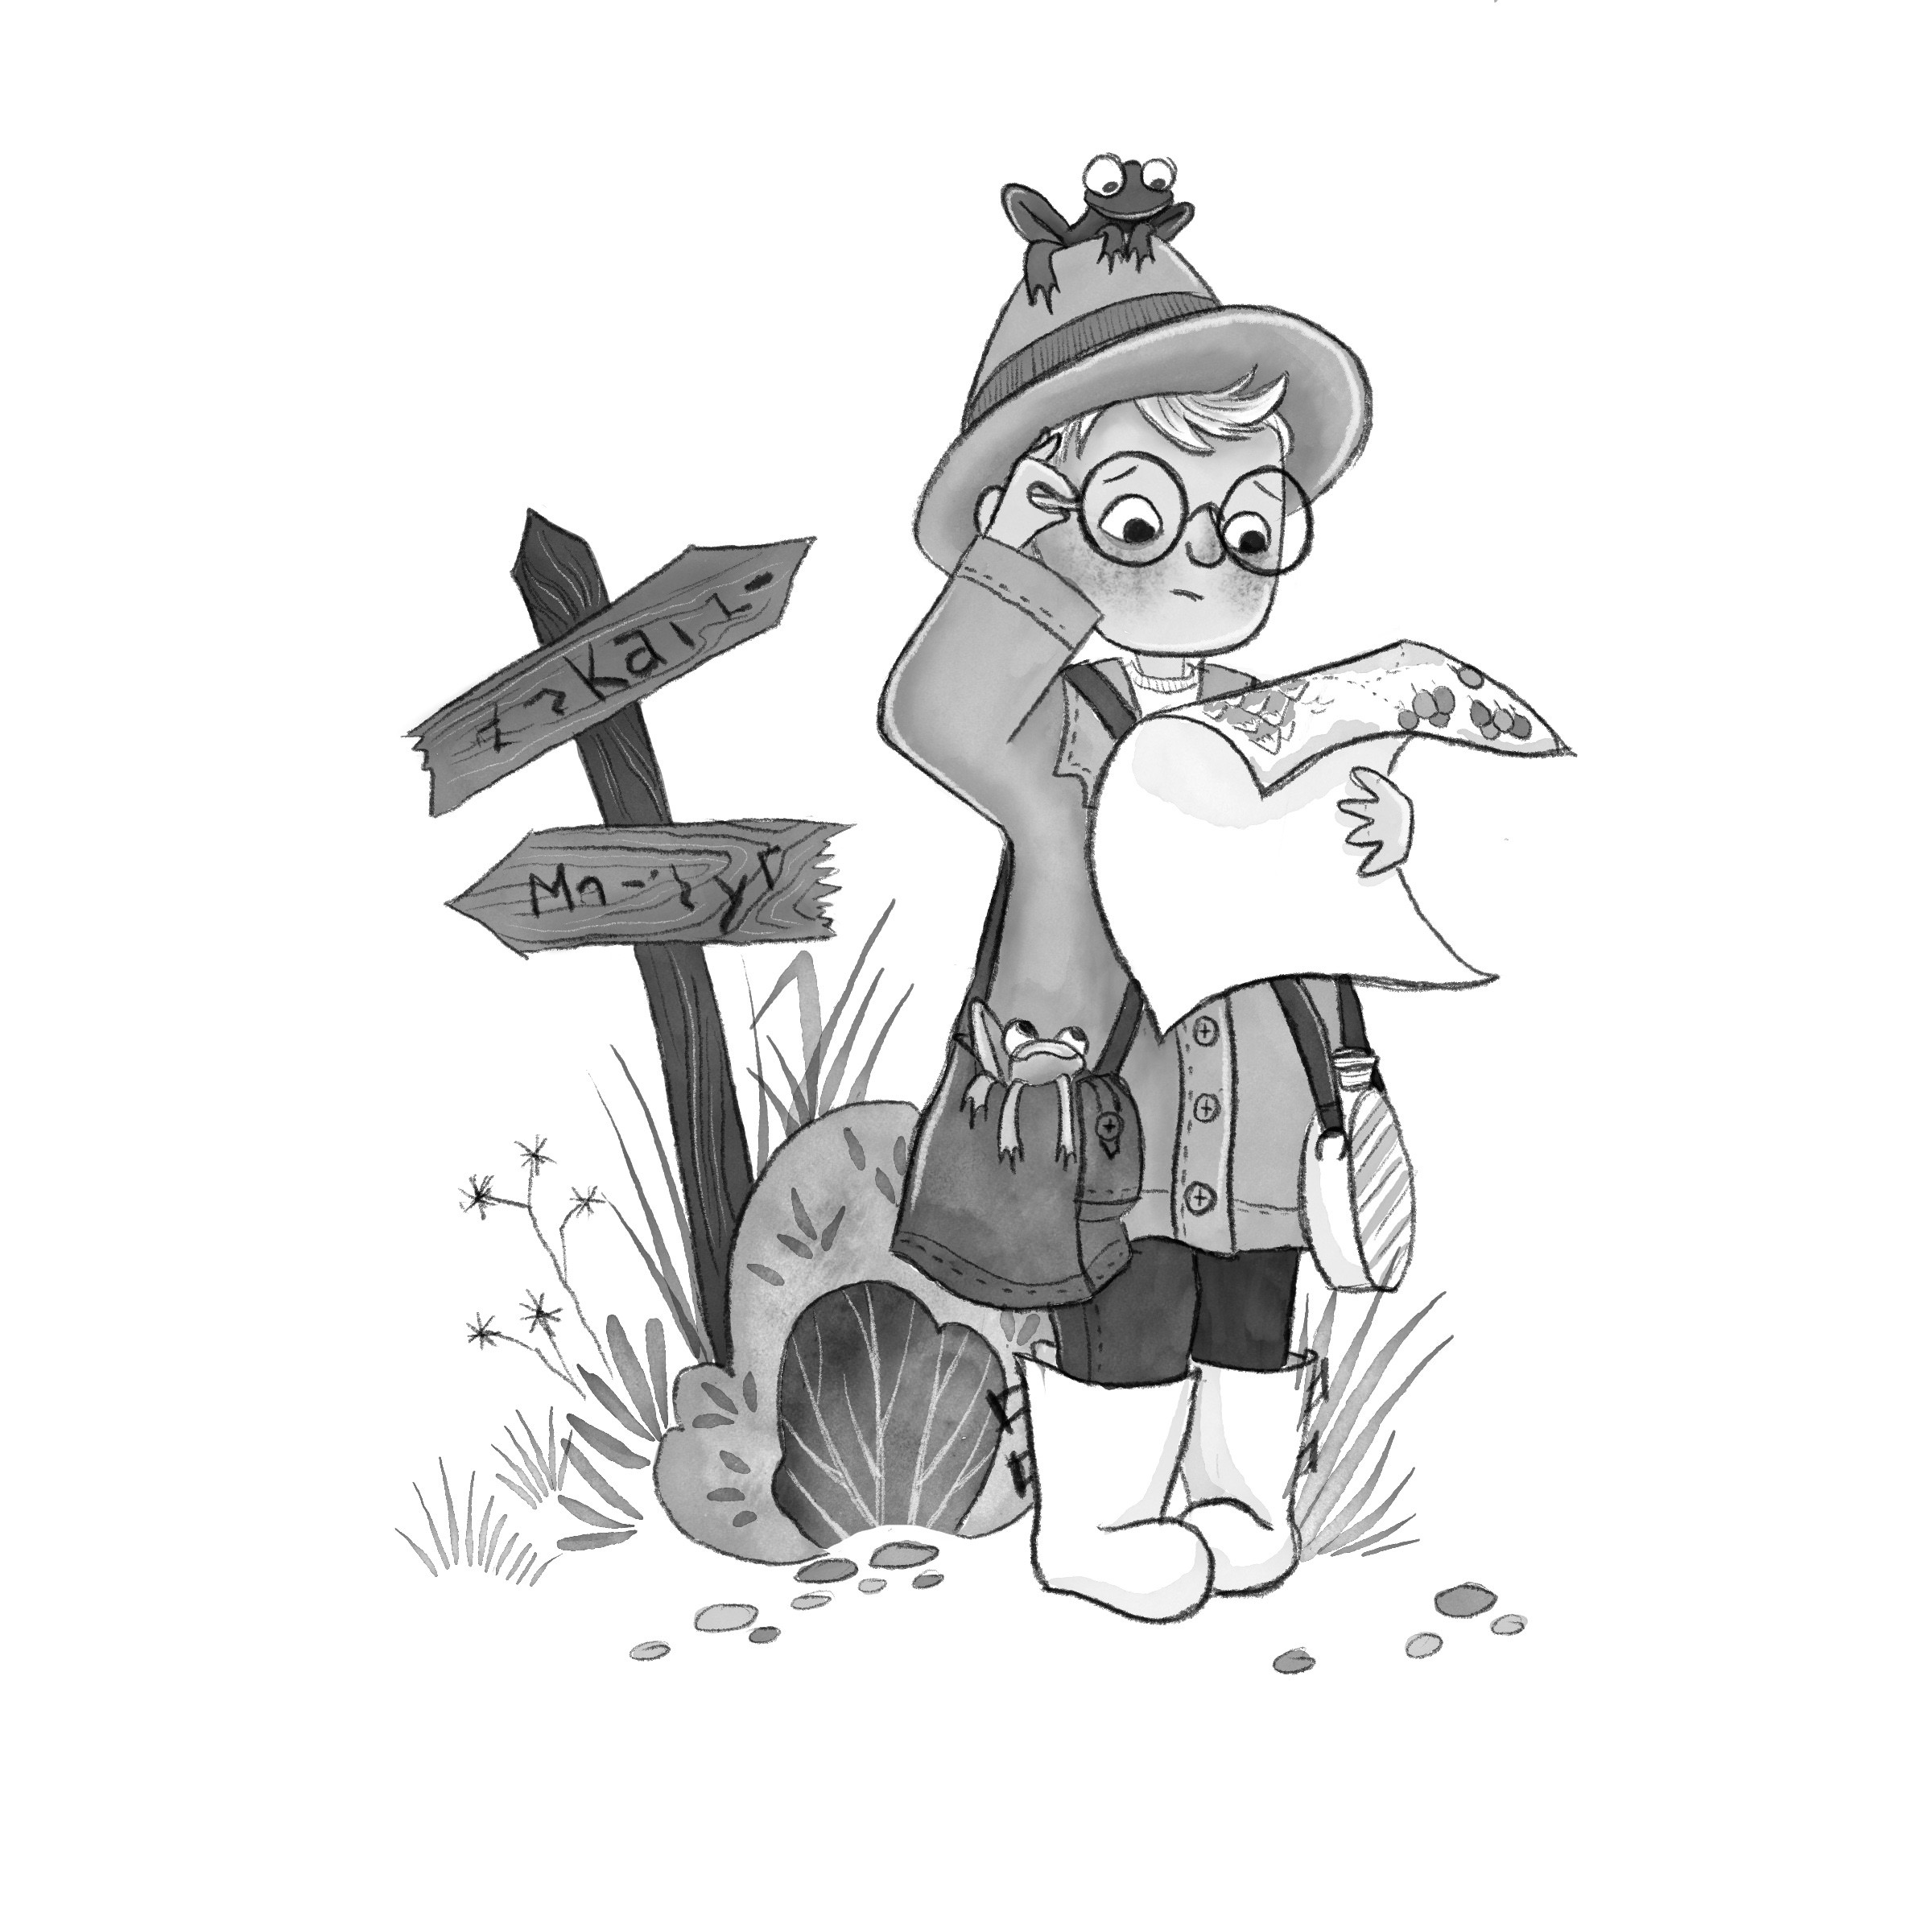 Black and white children's book character illustration of a little boy wearing an explorers hat and coat and reading a map. Behind him are old fashioned wooden road signs and grass and bushes. There is a frog on his head and another cute frog on a leather bag that is slung over his shoulder. There is a canteen slung over his other shoulder.